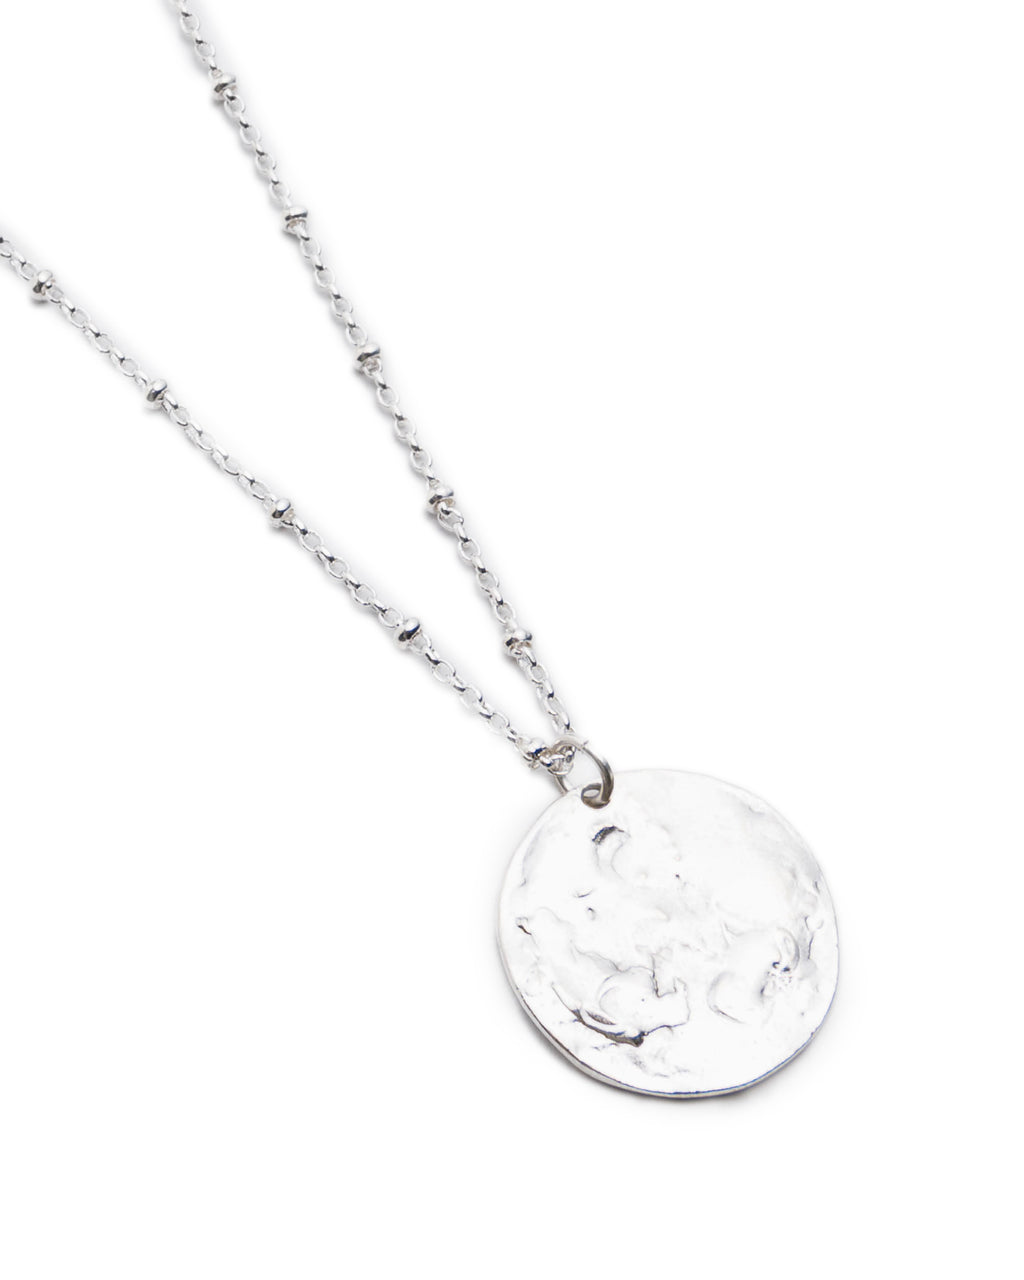 Silver Hammered Full Moon Necklace on Satellite Chain